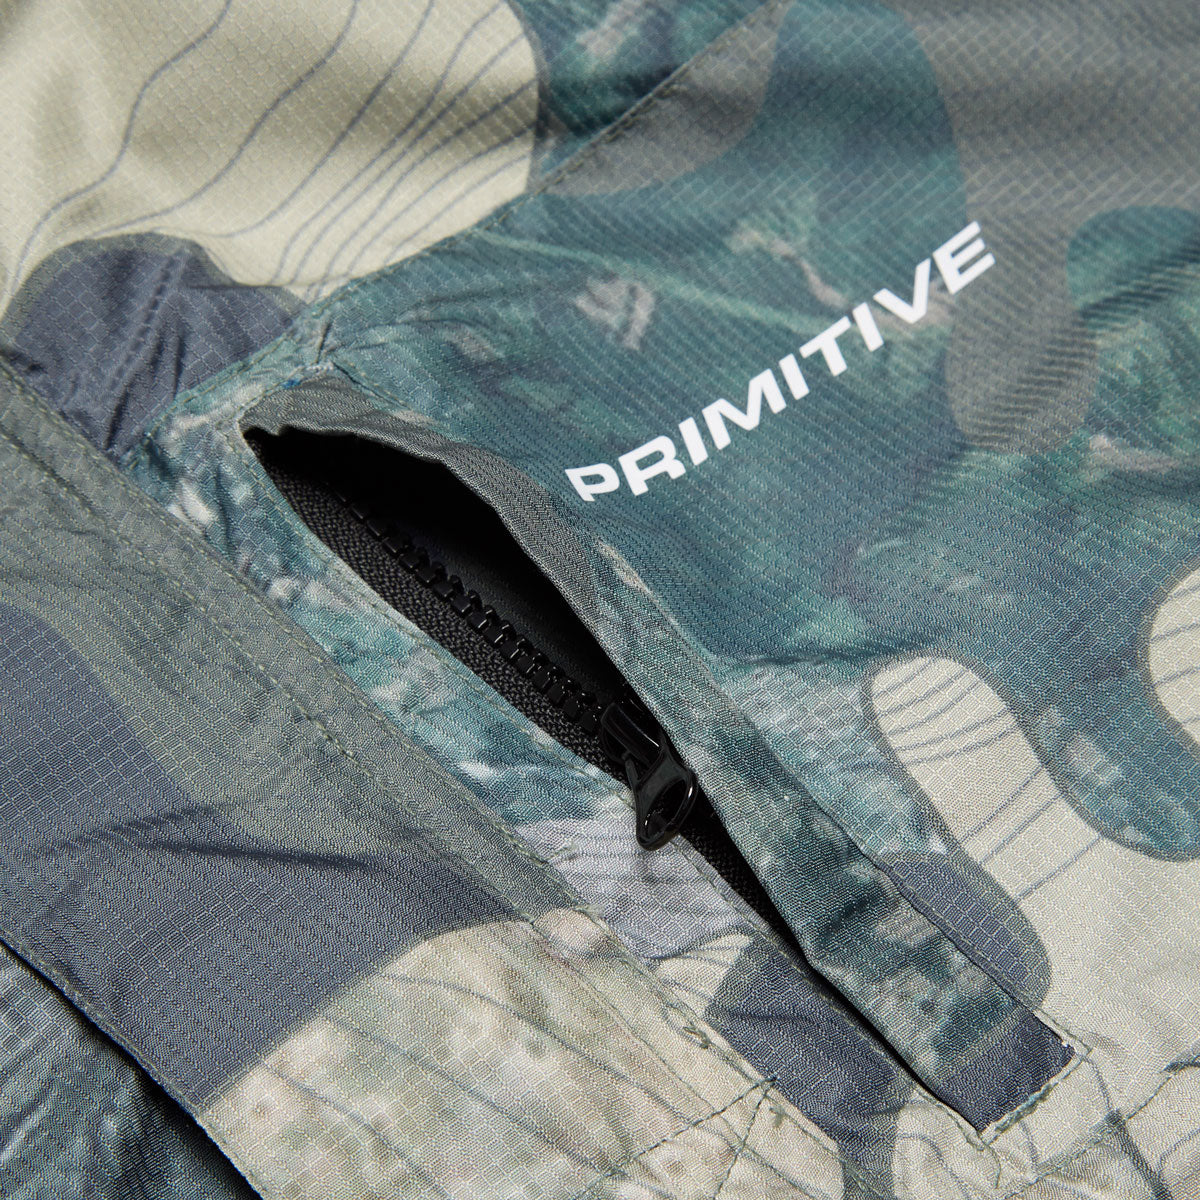 Primitive x Call Of Duty Mapping Anroak Jacket - Olive image 3